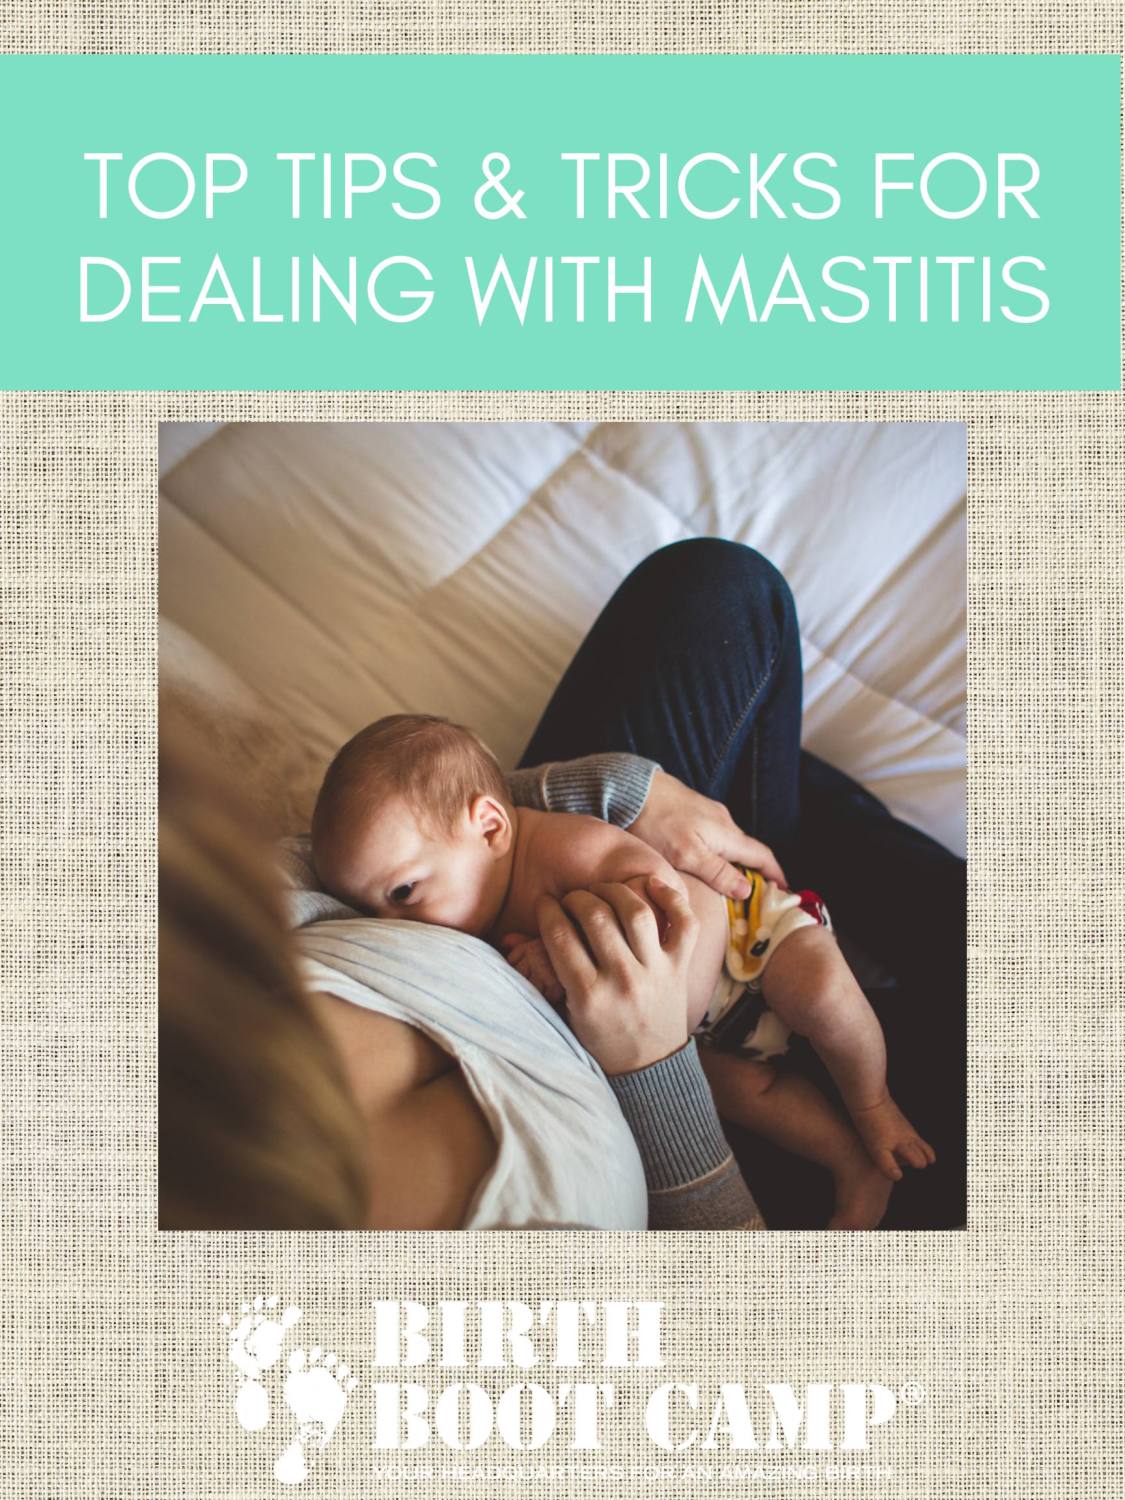 Top Tips & Tricks for Dealing With Mastitis